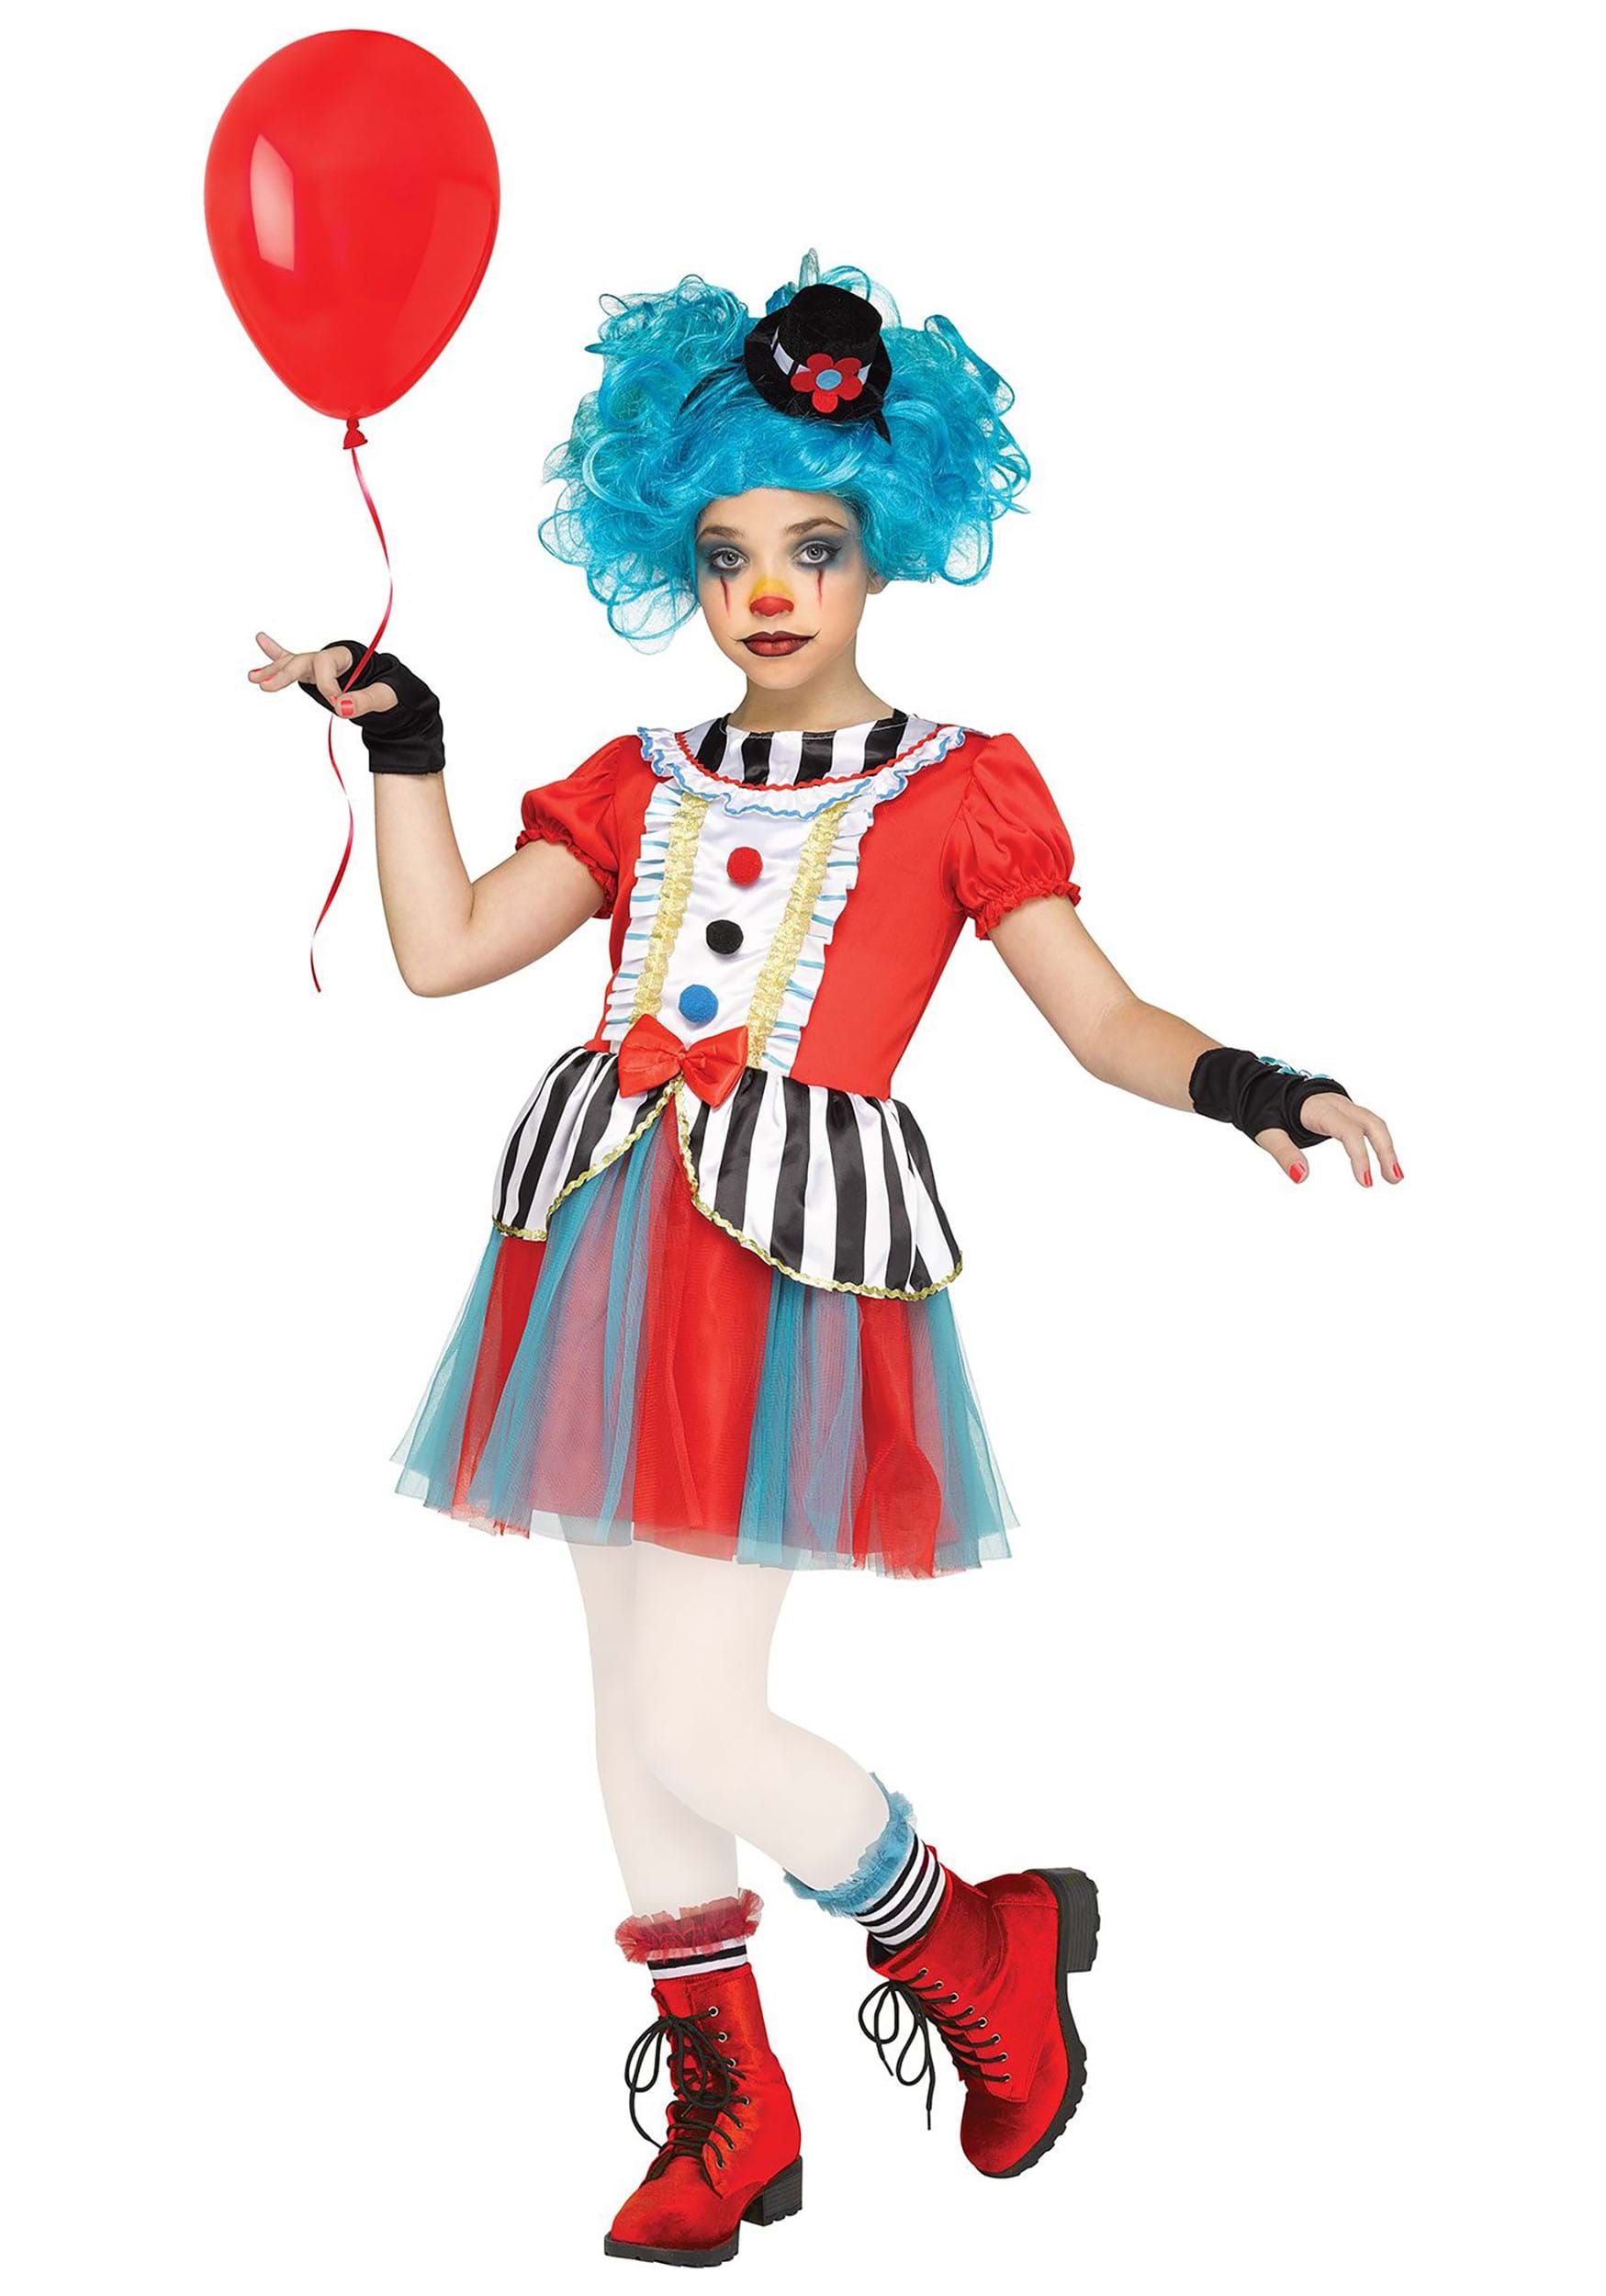 https://images.halloweencostumes.com/products/84306/1-1/girls-carnival-cutie-costume.jpg